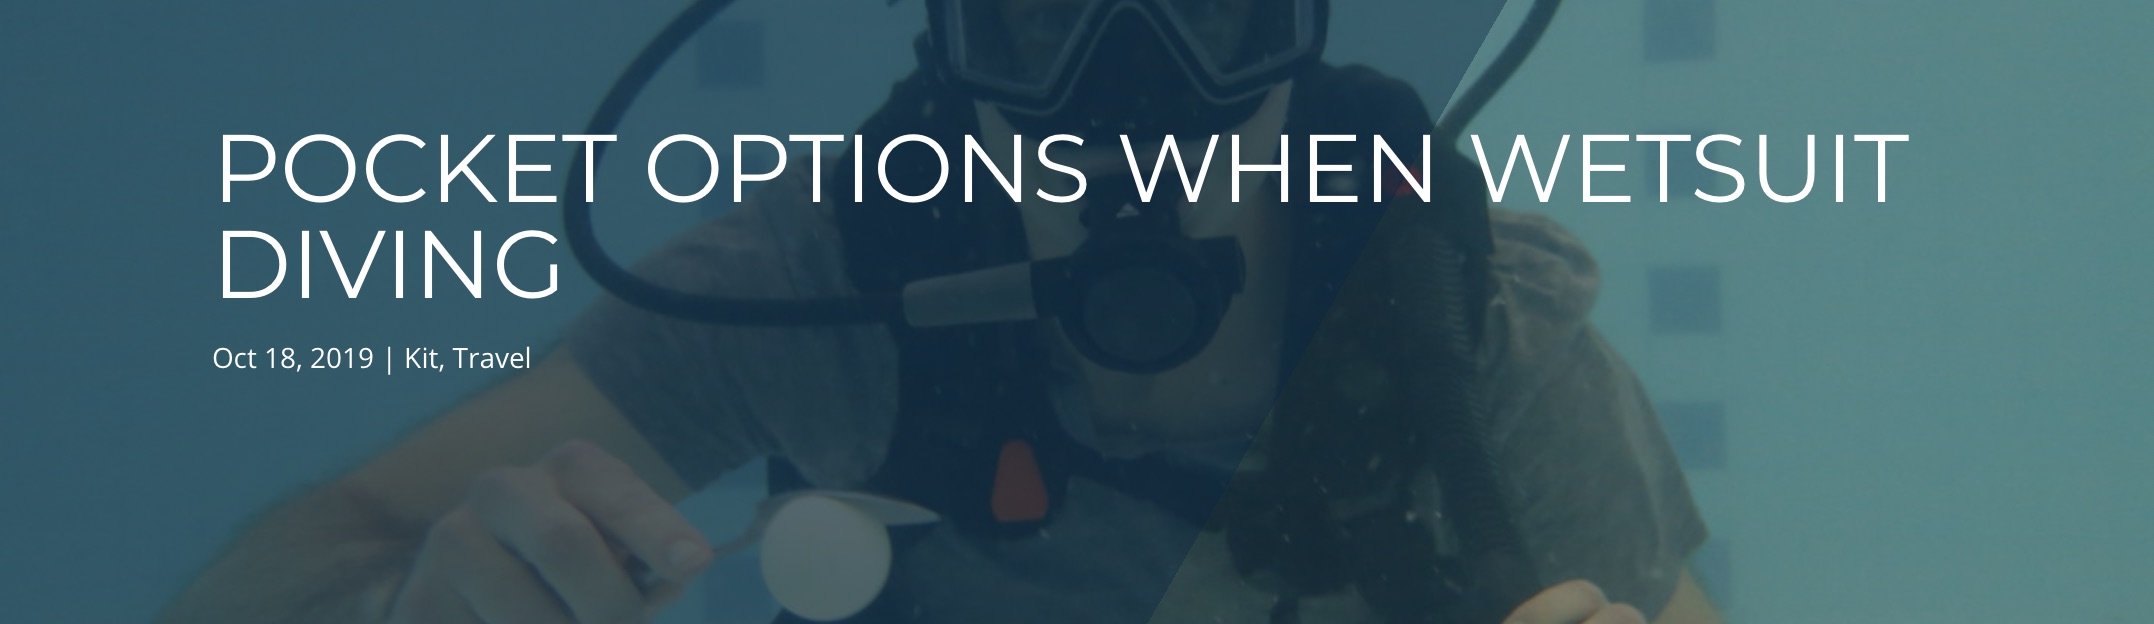 Pocket Options When Wetsuit Diving